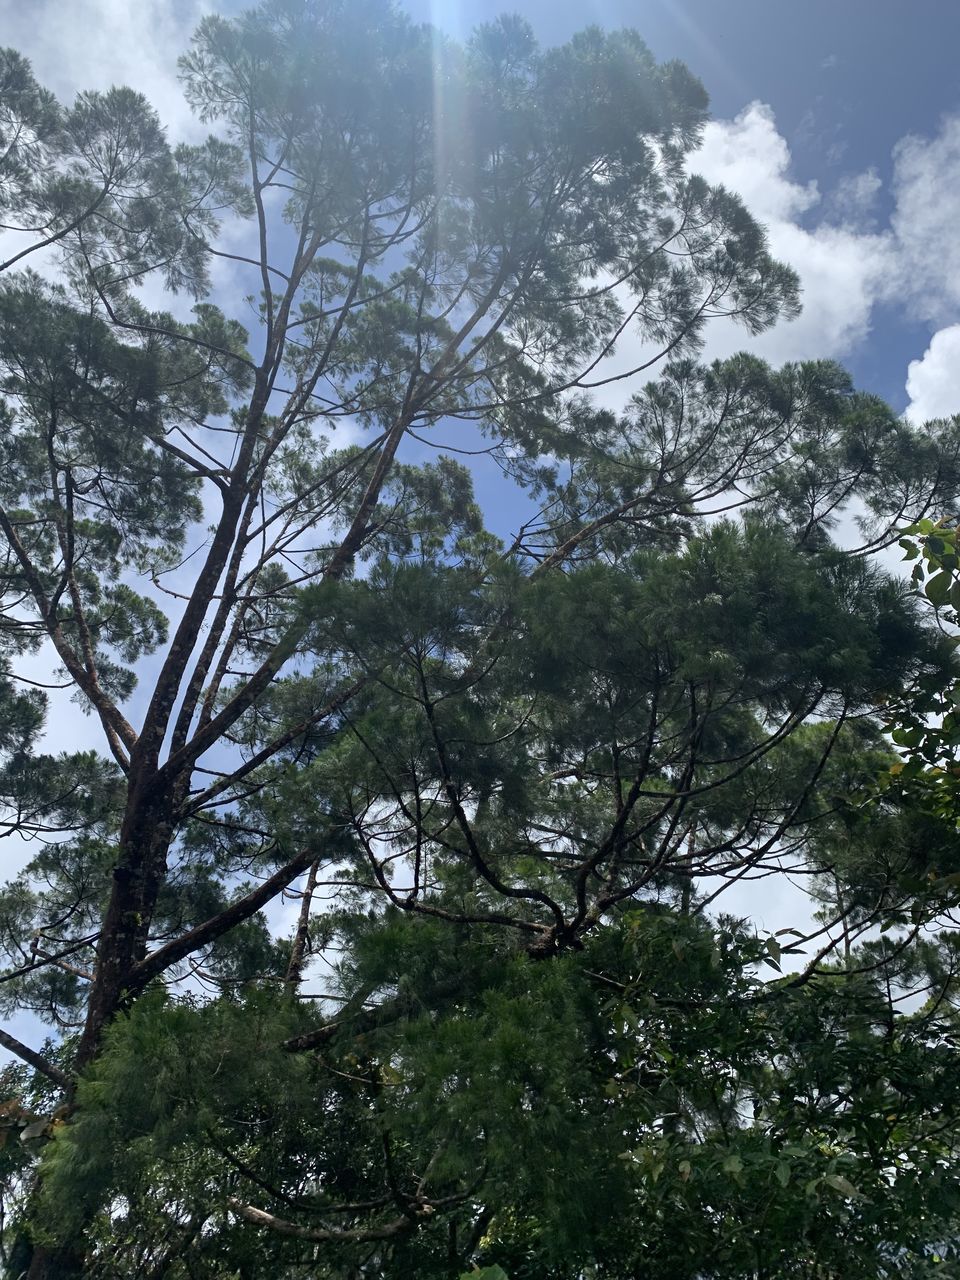 tree, plant, low angle view, sky, nature, forest, beauty in nature, branch, sunlight, leaf, growth, cloud, no people, tranquility, day, outdoors, green, environment, land, scenics - nature, non-urban scene, pinaceae, pine tree, coniferous tree